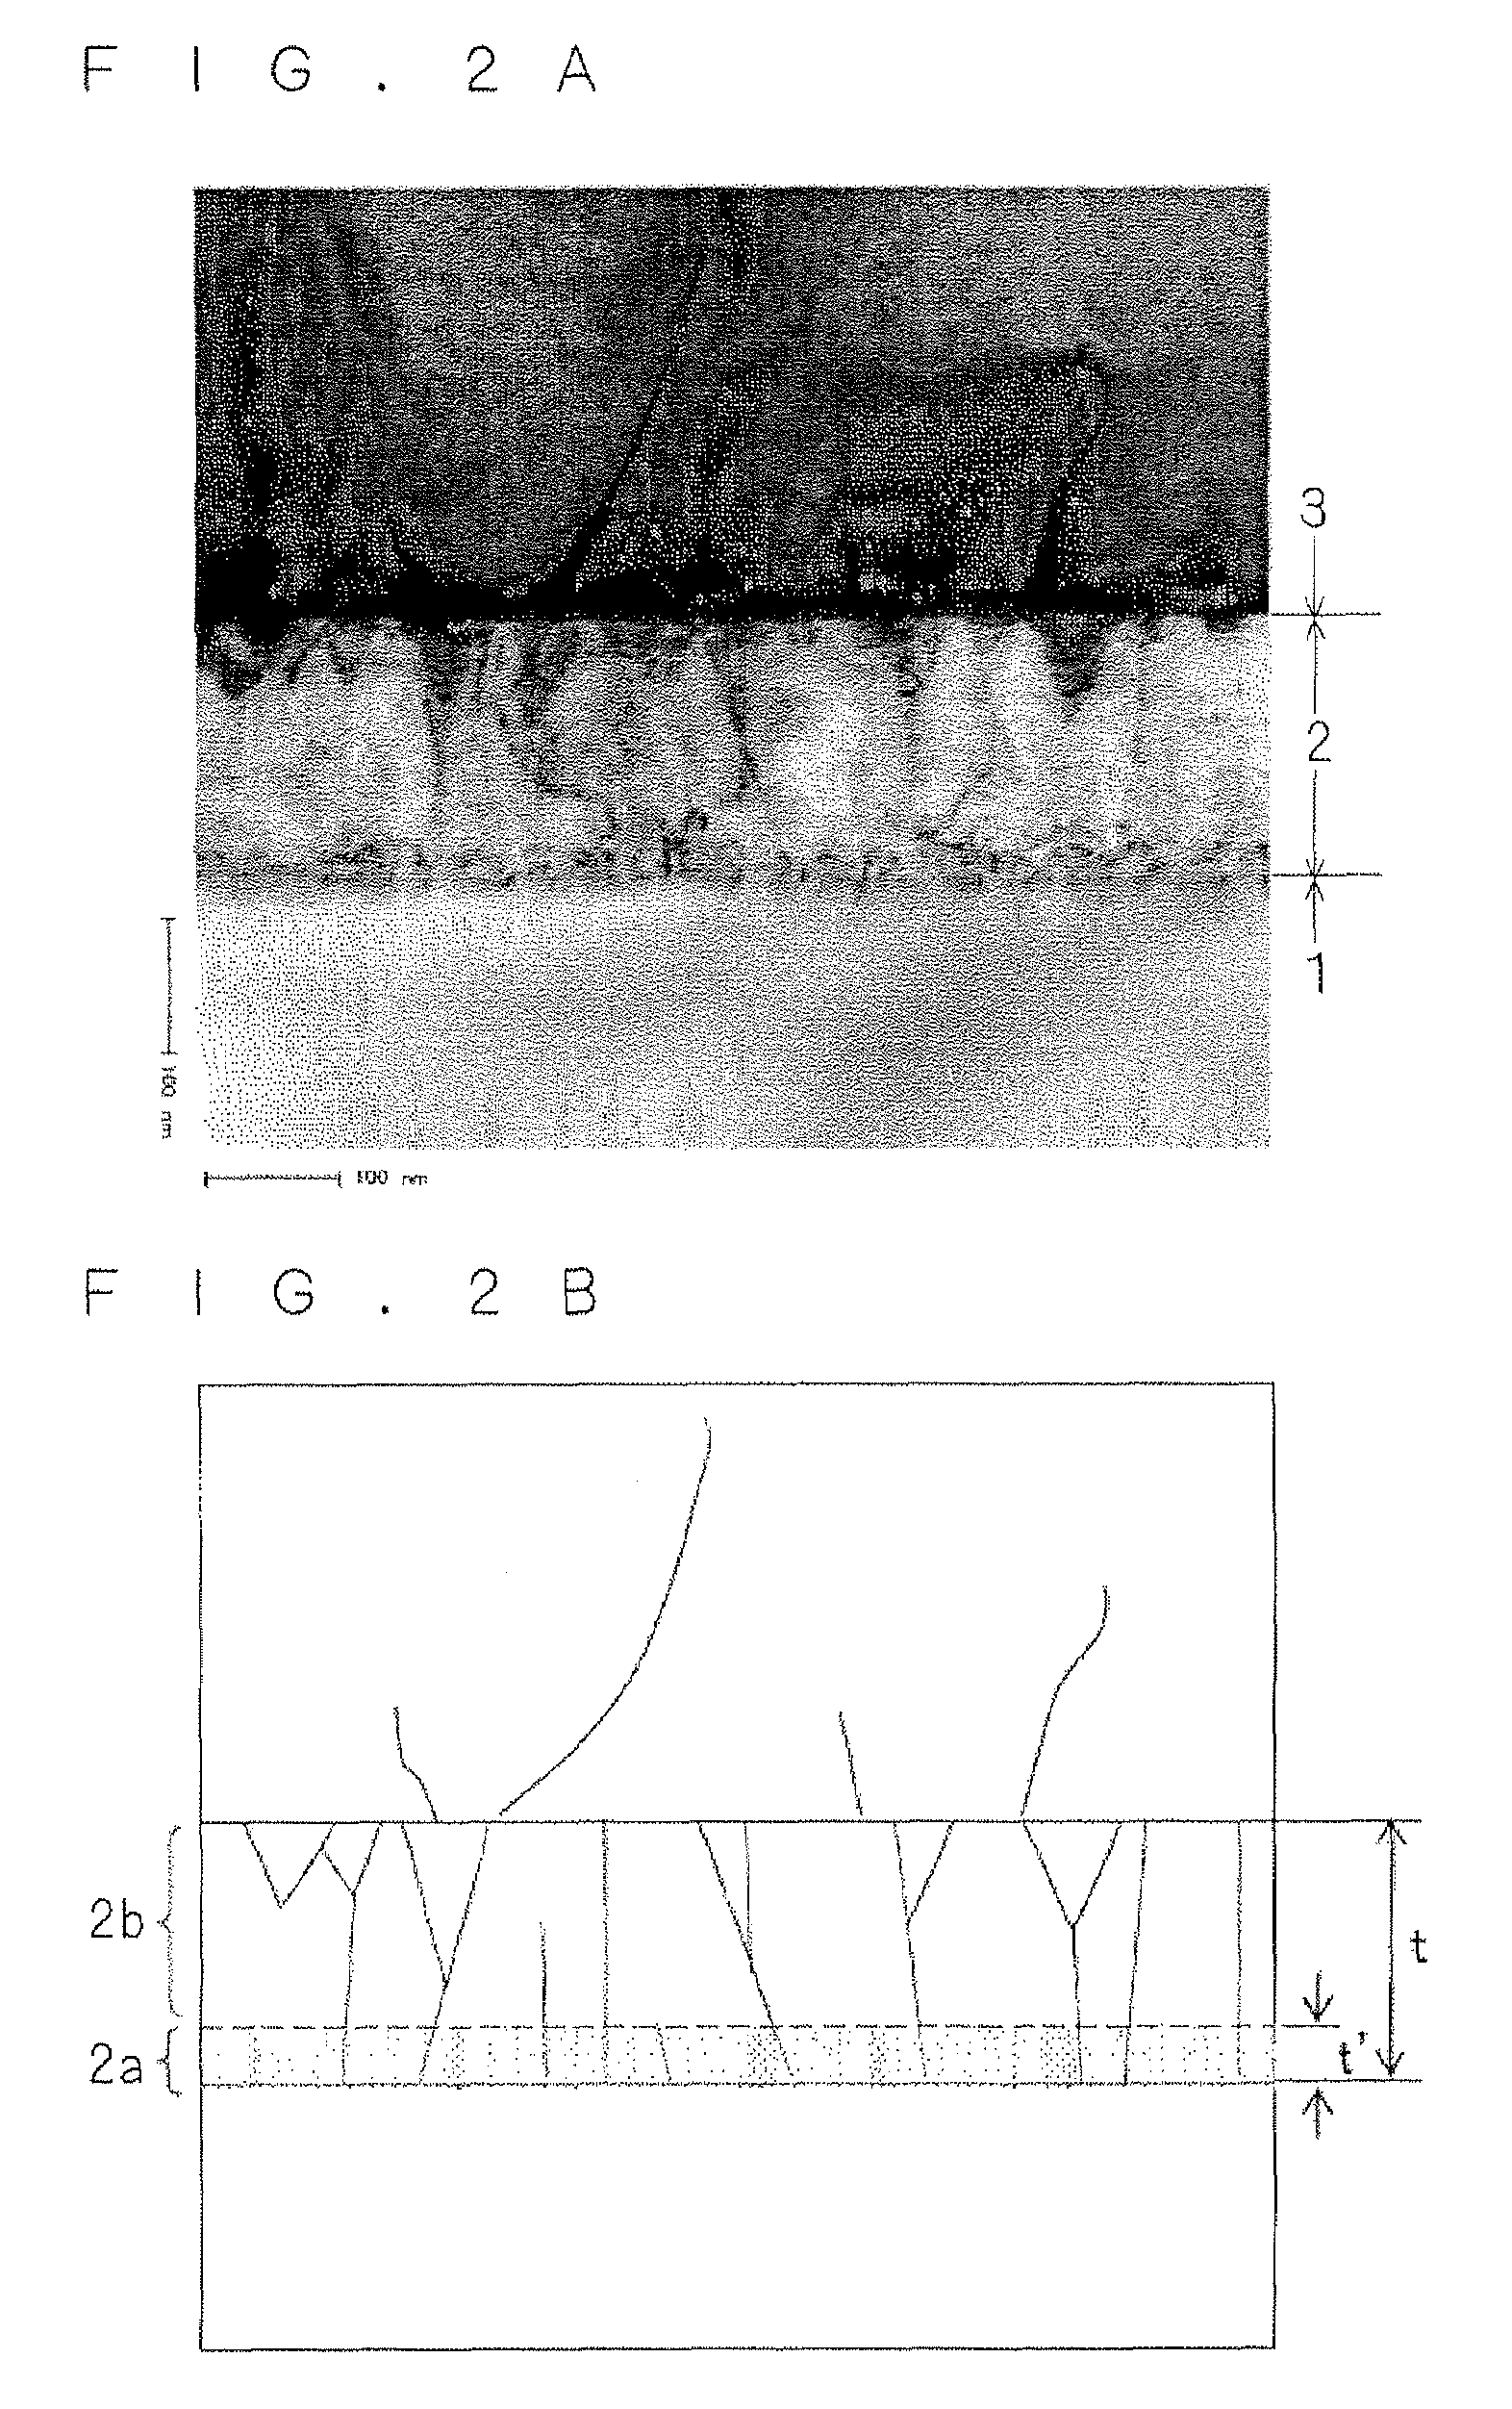 Epitaxial substrate, semiconductor device substrate, and HEMT device